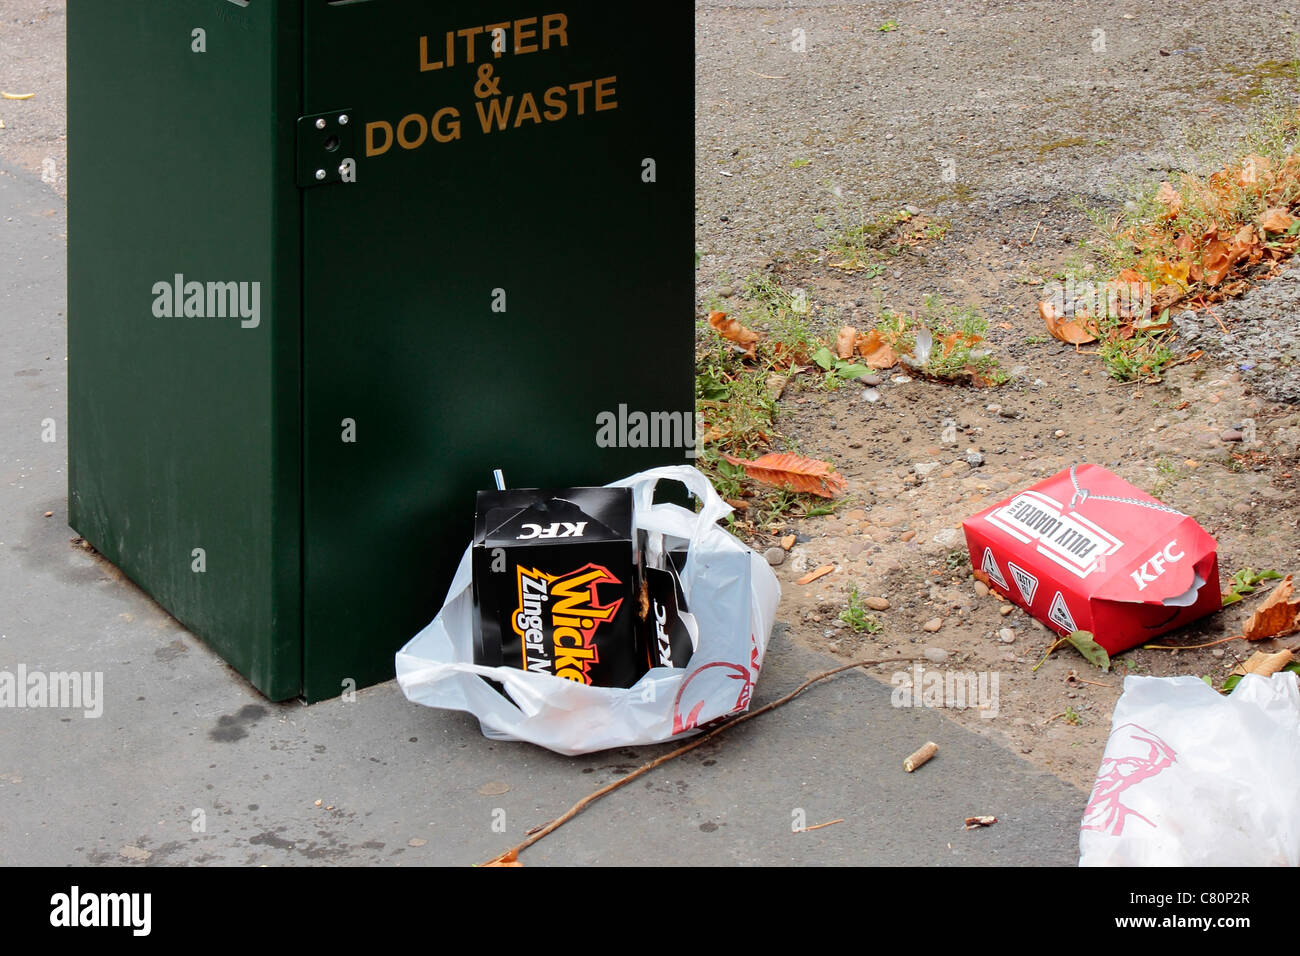 KFC Packaging carelessly discarded next to a litter bin Stock Photo